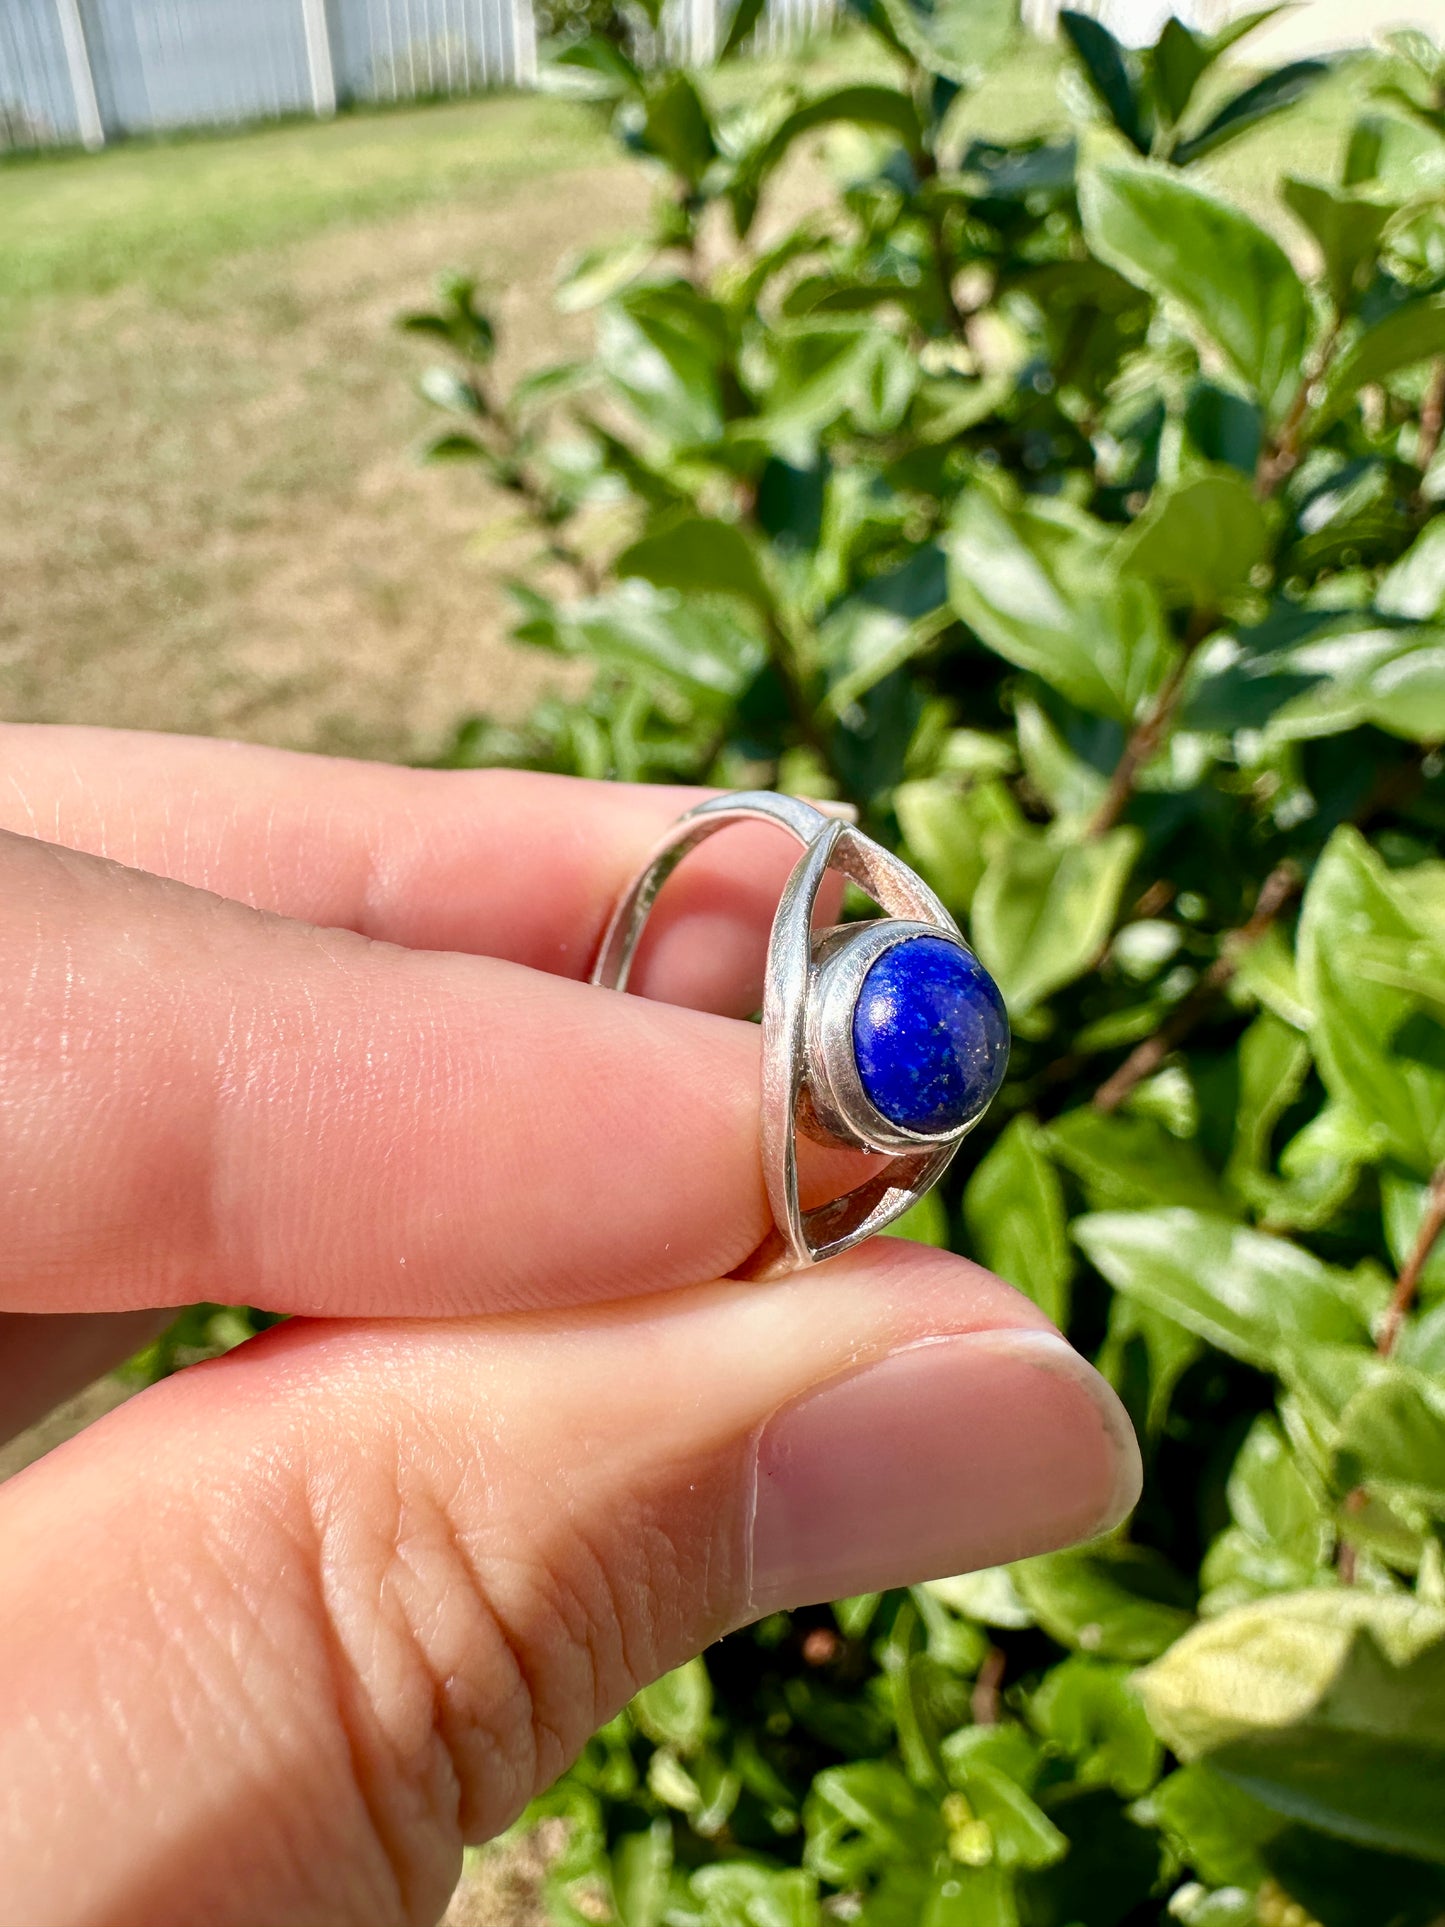 Handcrafted Lapis Lazuli Ring in Sterling Silver - Size 8 Elegant Blue Gemstone Jewelry - Unique Artisan Crafted Ring - Perfect Gift for Her